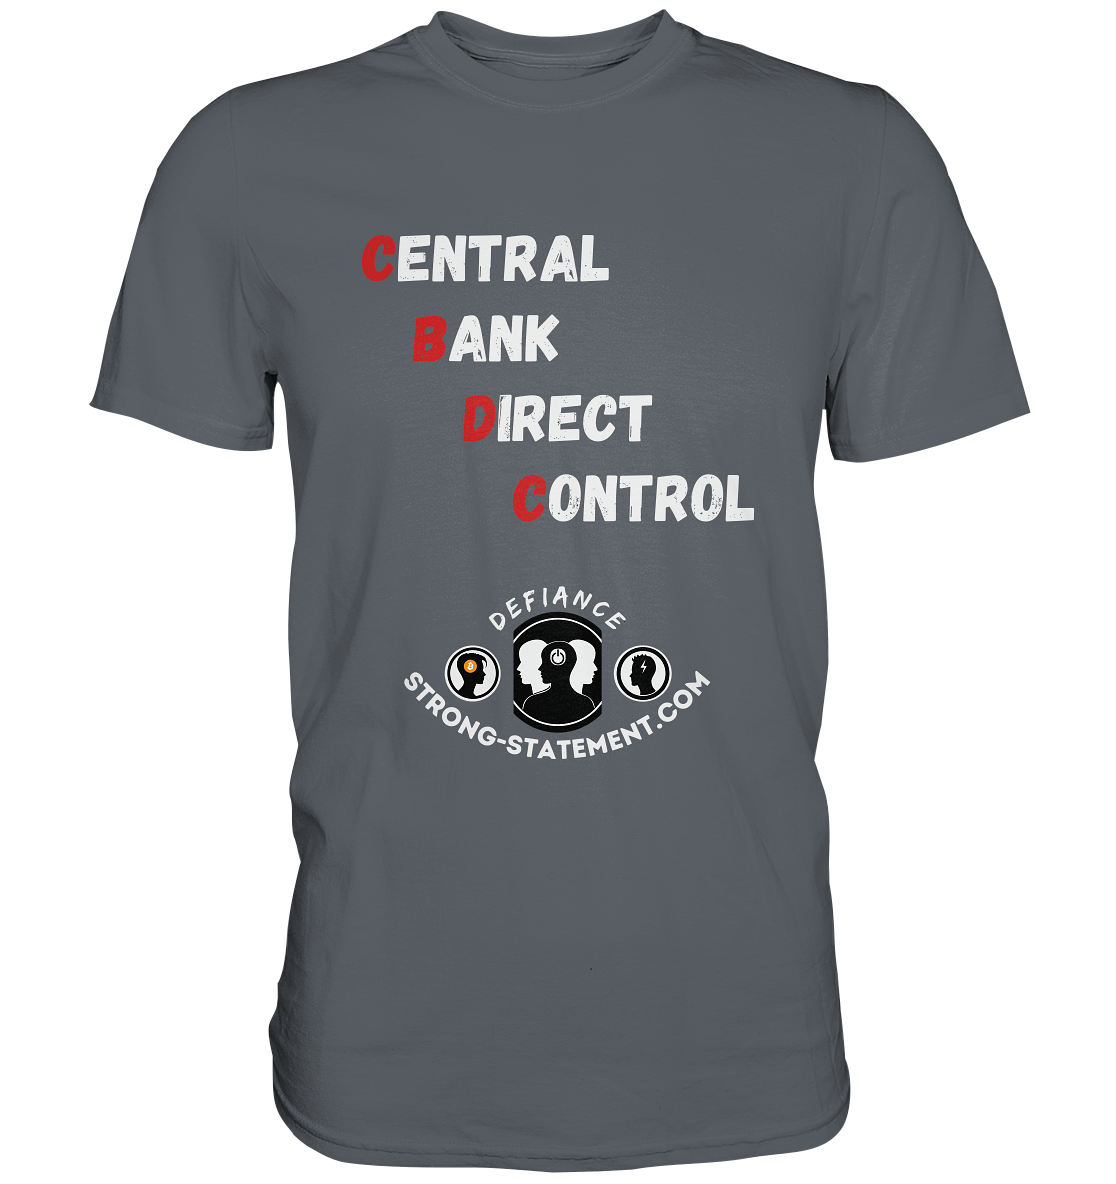 CENTRAL BANK DIRECT CONTROL - Defiance - Strong-Statement.com - Classic Shirt